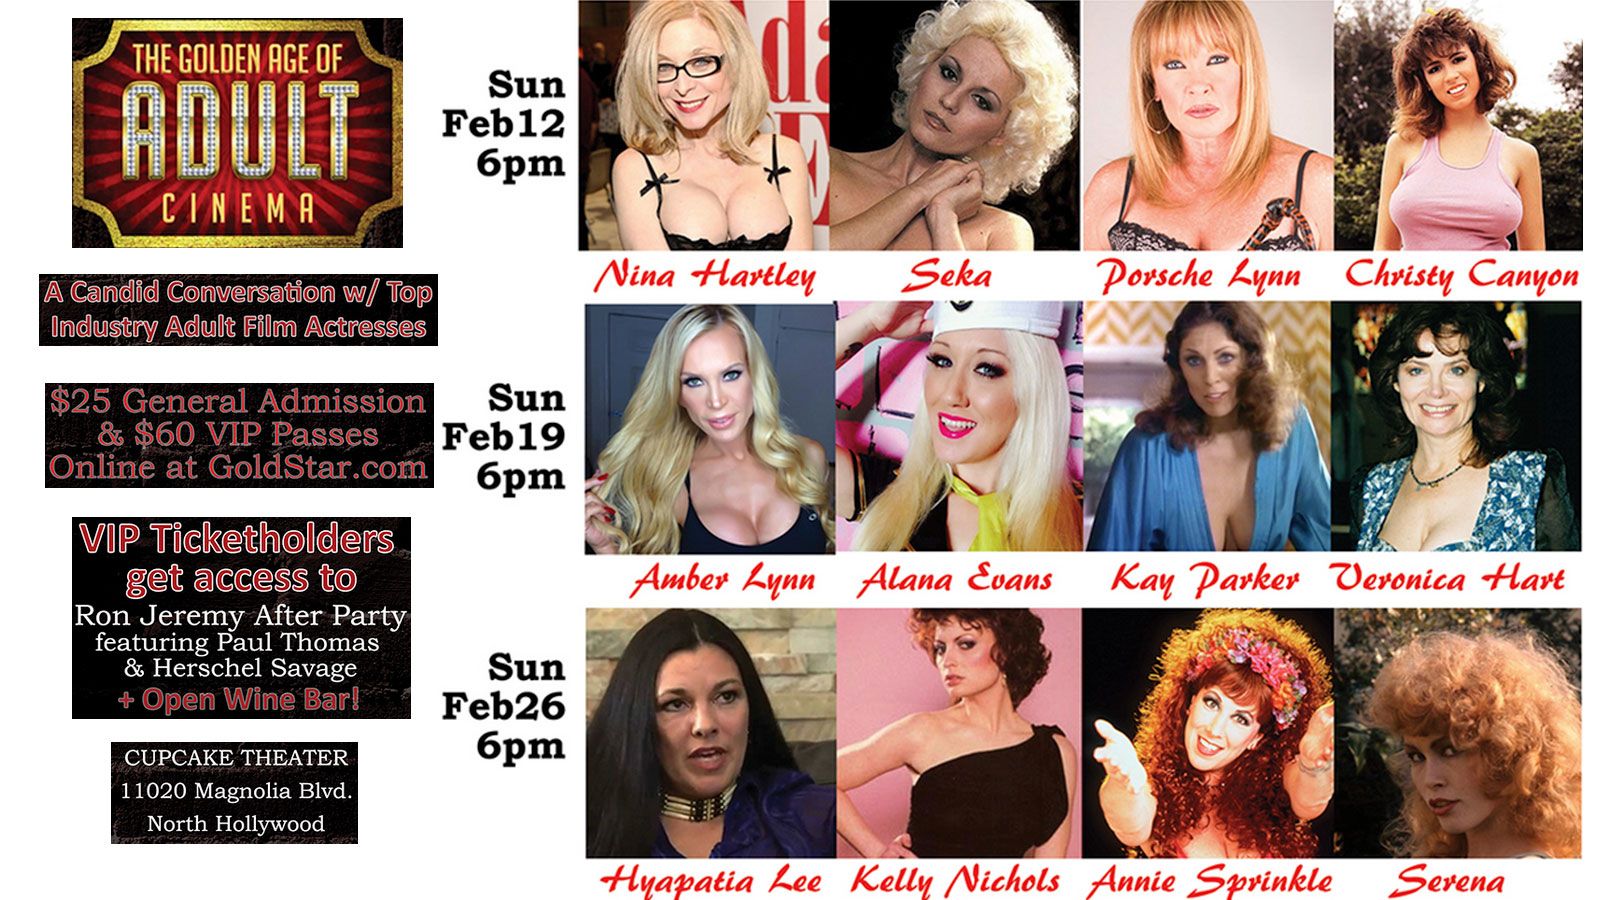 Sunday's 'Golden Age of Adult Cinema' Features Nina Hartley, Seka, Others